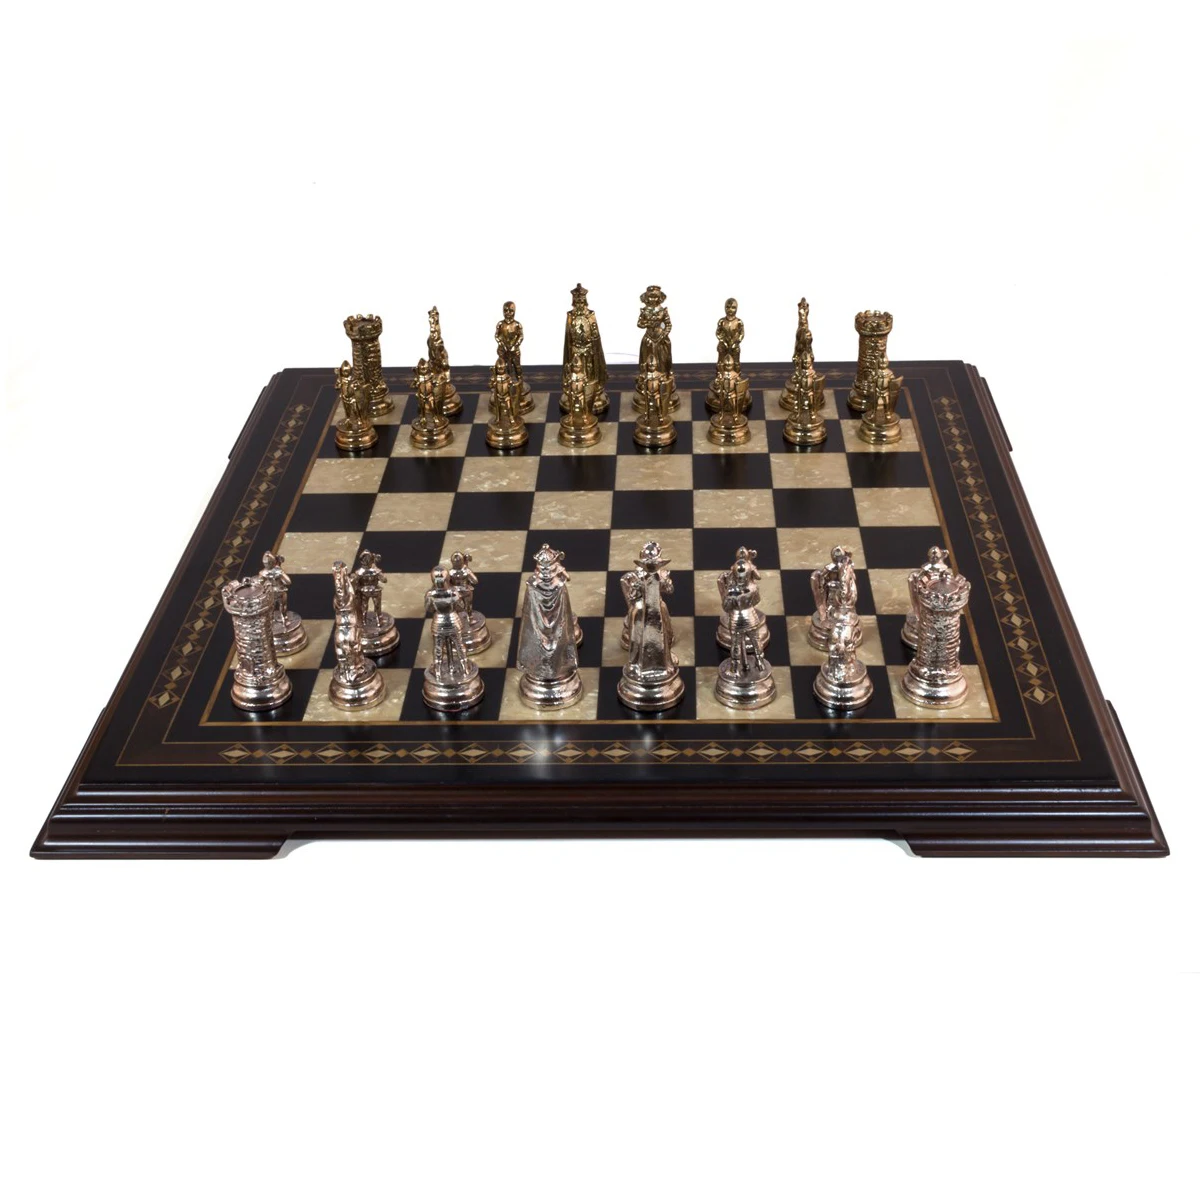 22.5'' Flat Footed Black Chessboard - Solid Beech Wood Mosaic Engraved Chess Board Game Gift Items Deck Box Checkers Шахматы осада или шахматы со смертью